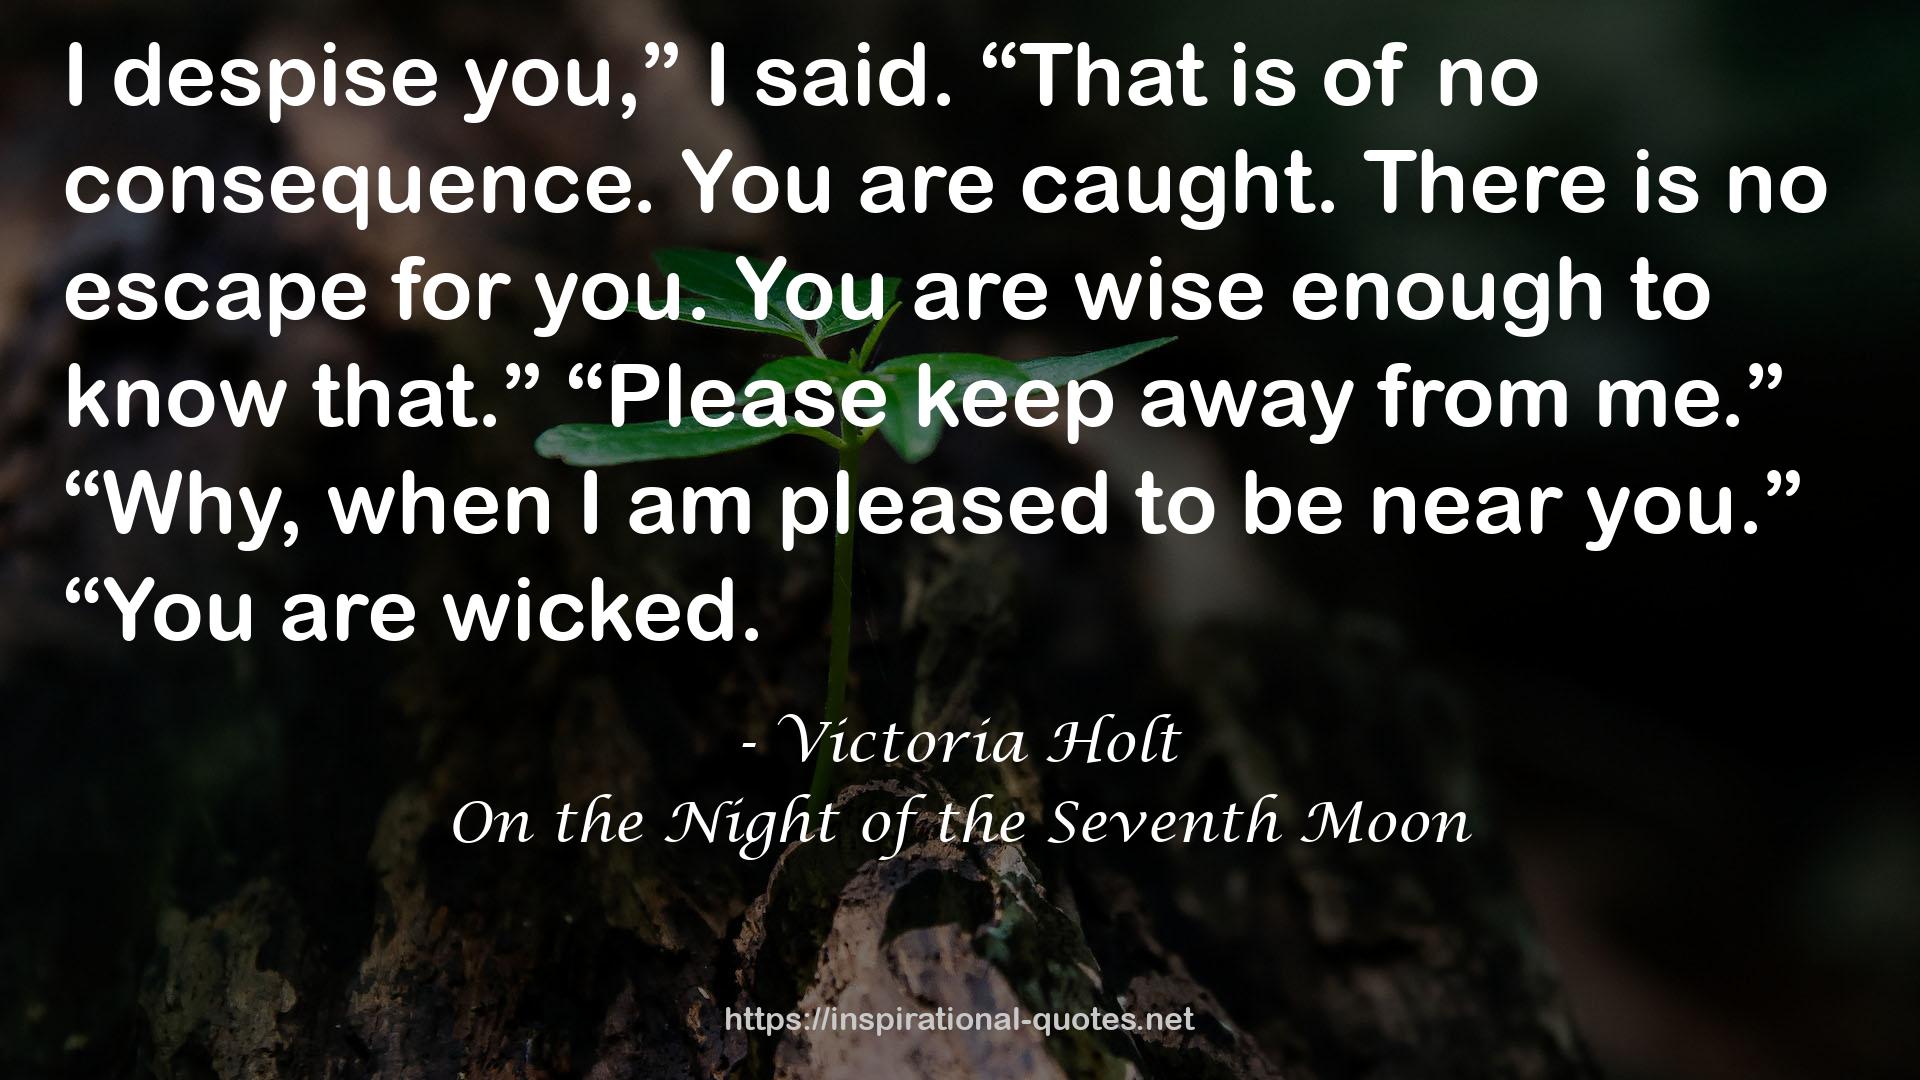 On the Night of the Seventh Moon QUOTES